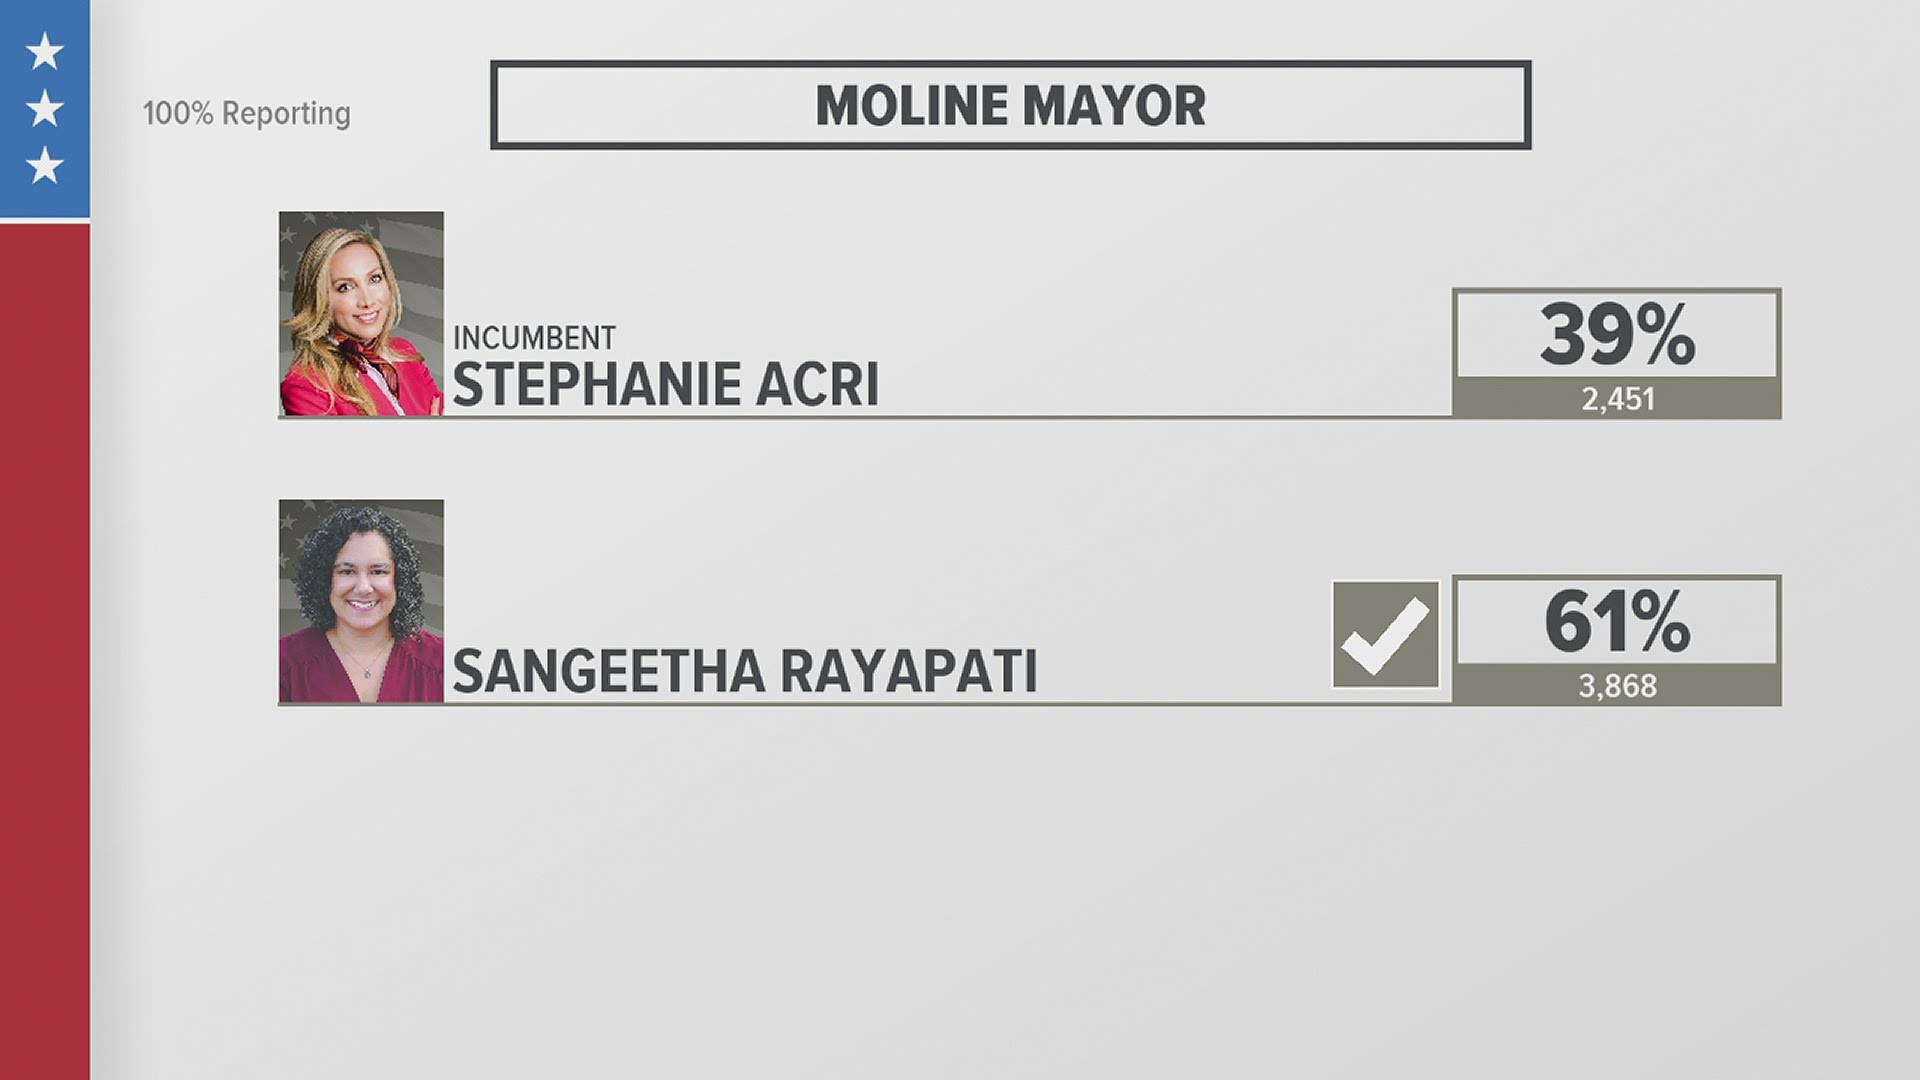 Voters in Moline elected Sangeetha Rayapati to serve as mayor over incumbent Stephanie Acri.